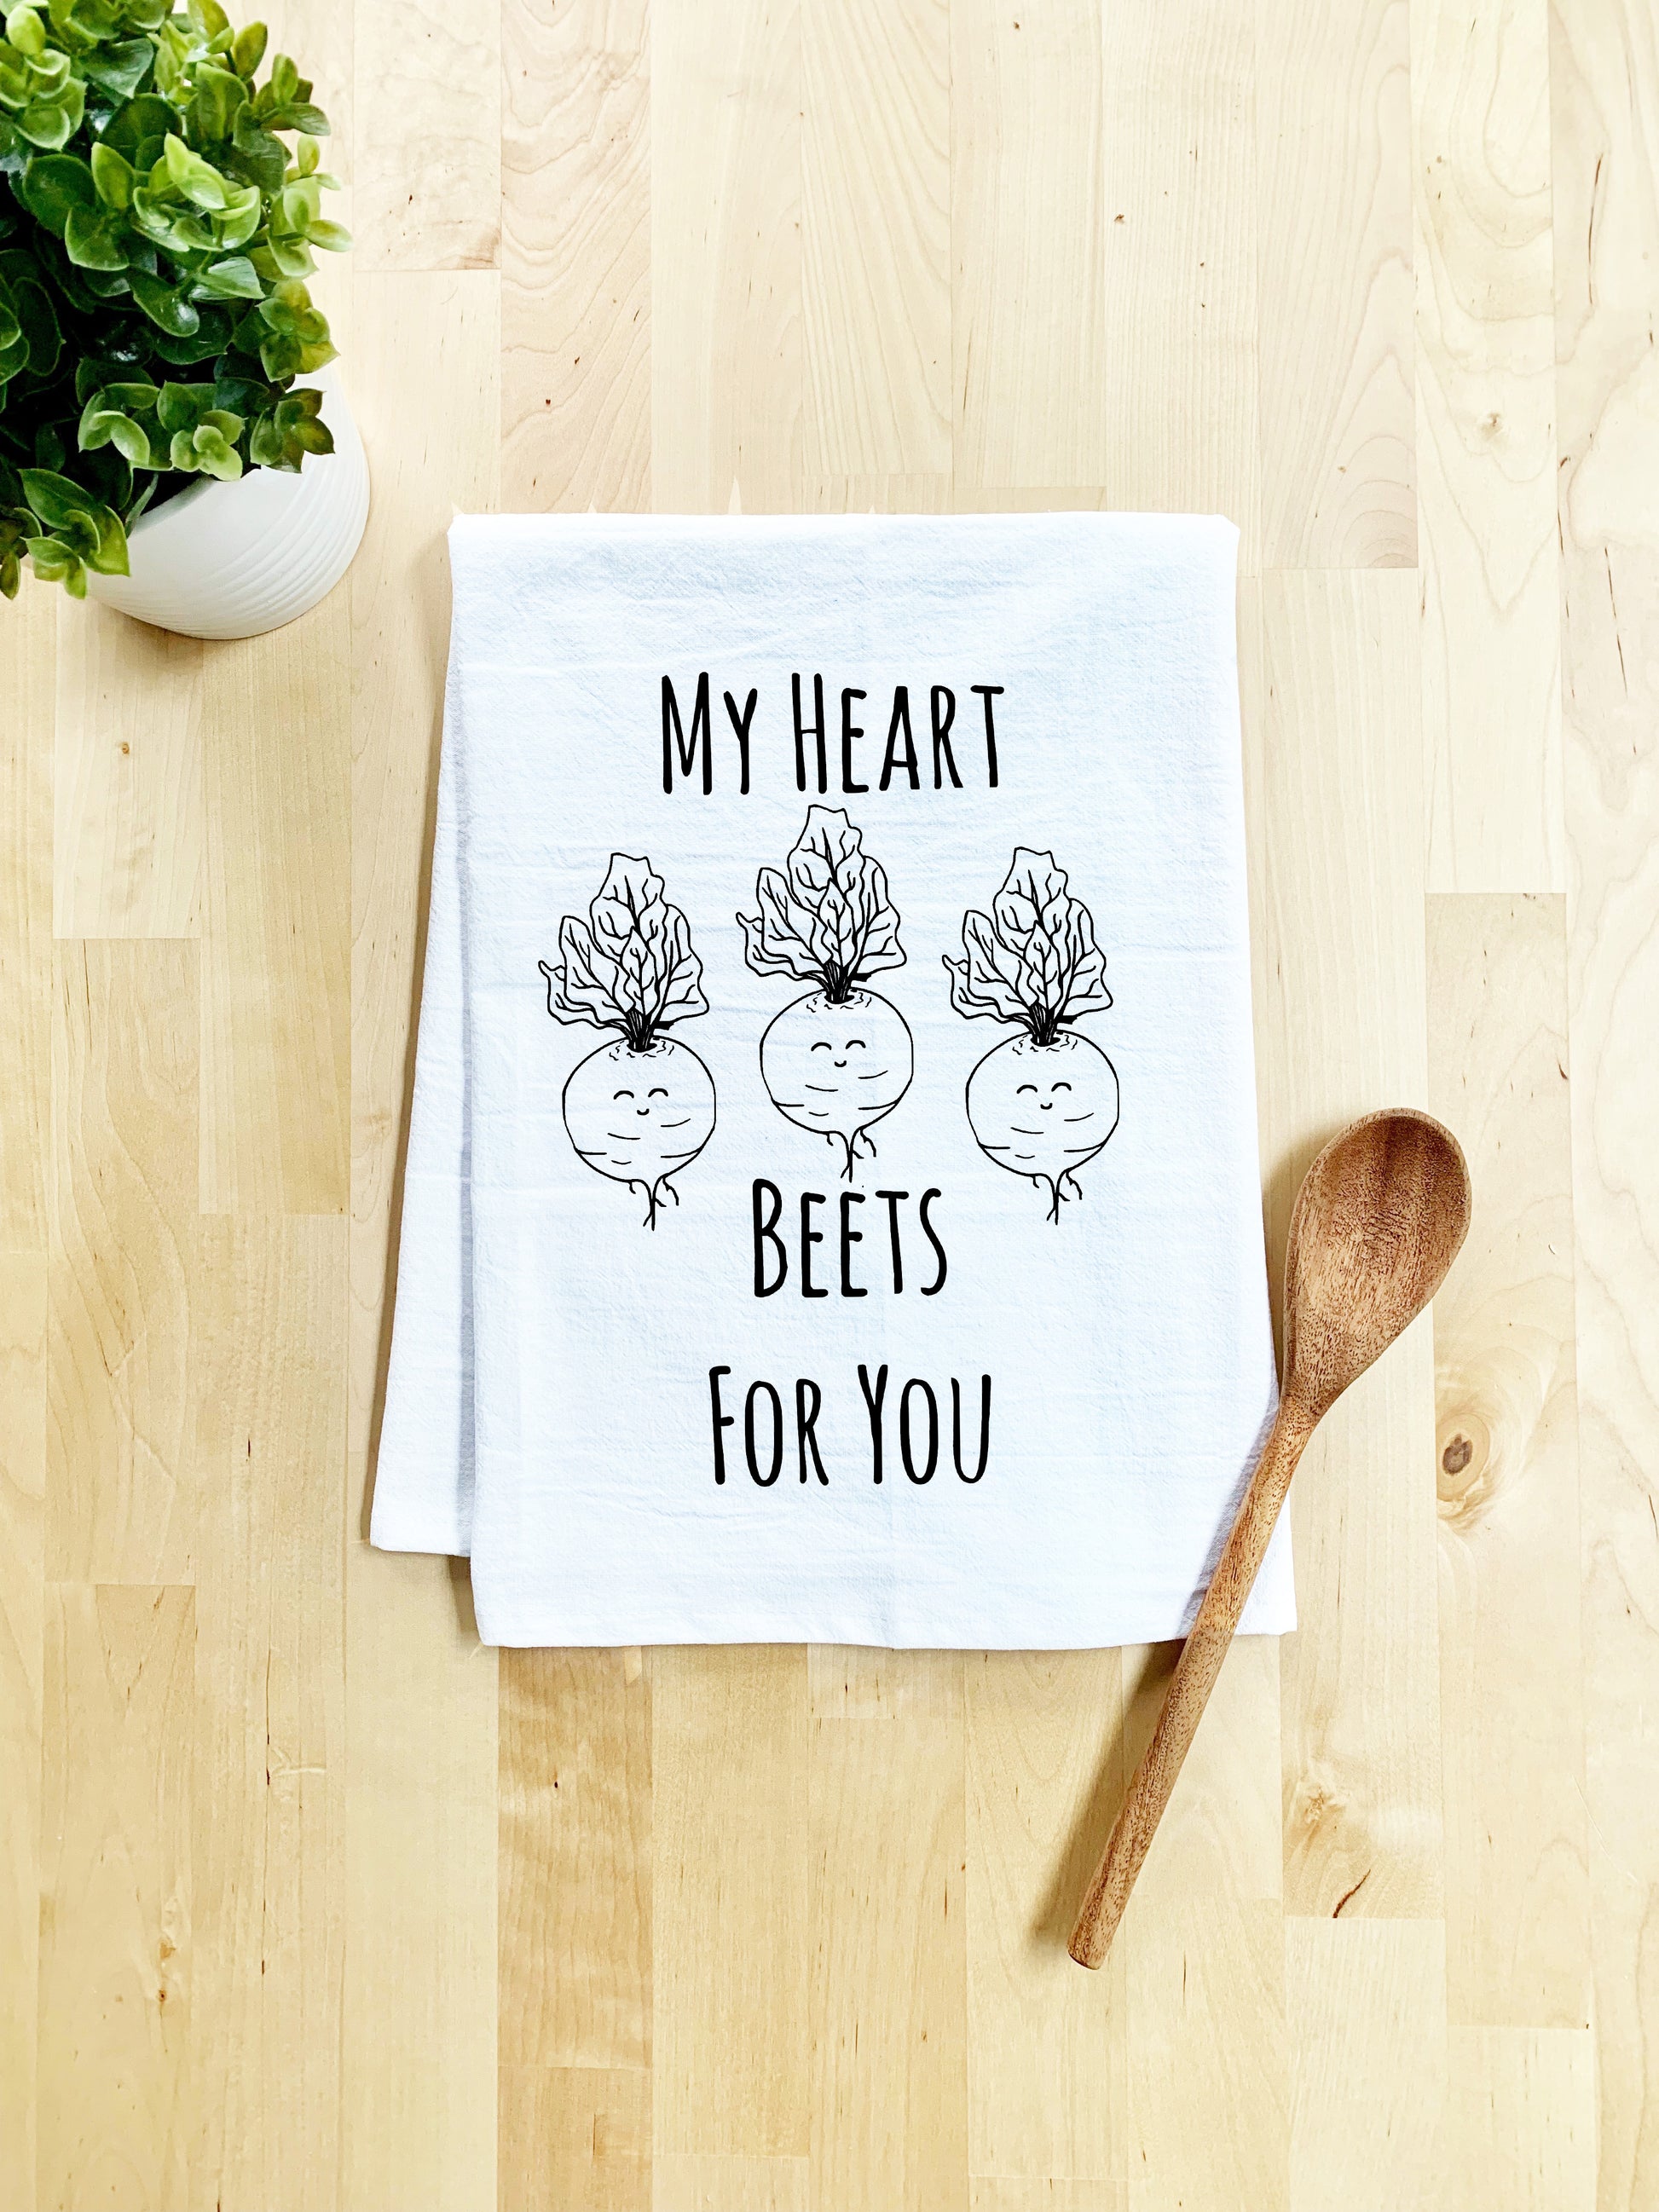 My Heart Beets for You Dish Towel - White Or Gray - MoonlightMakers